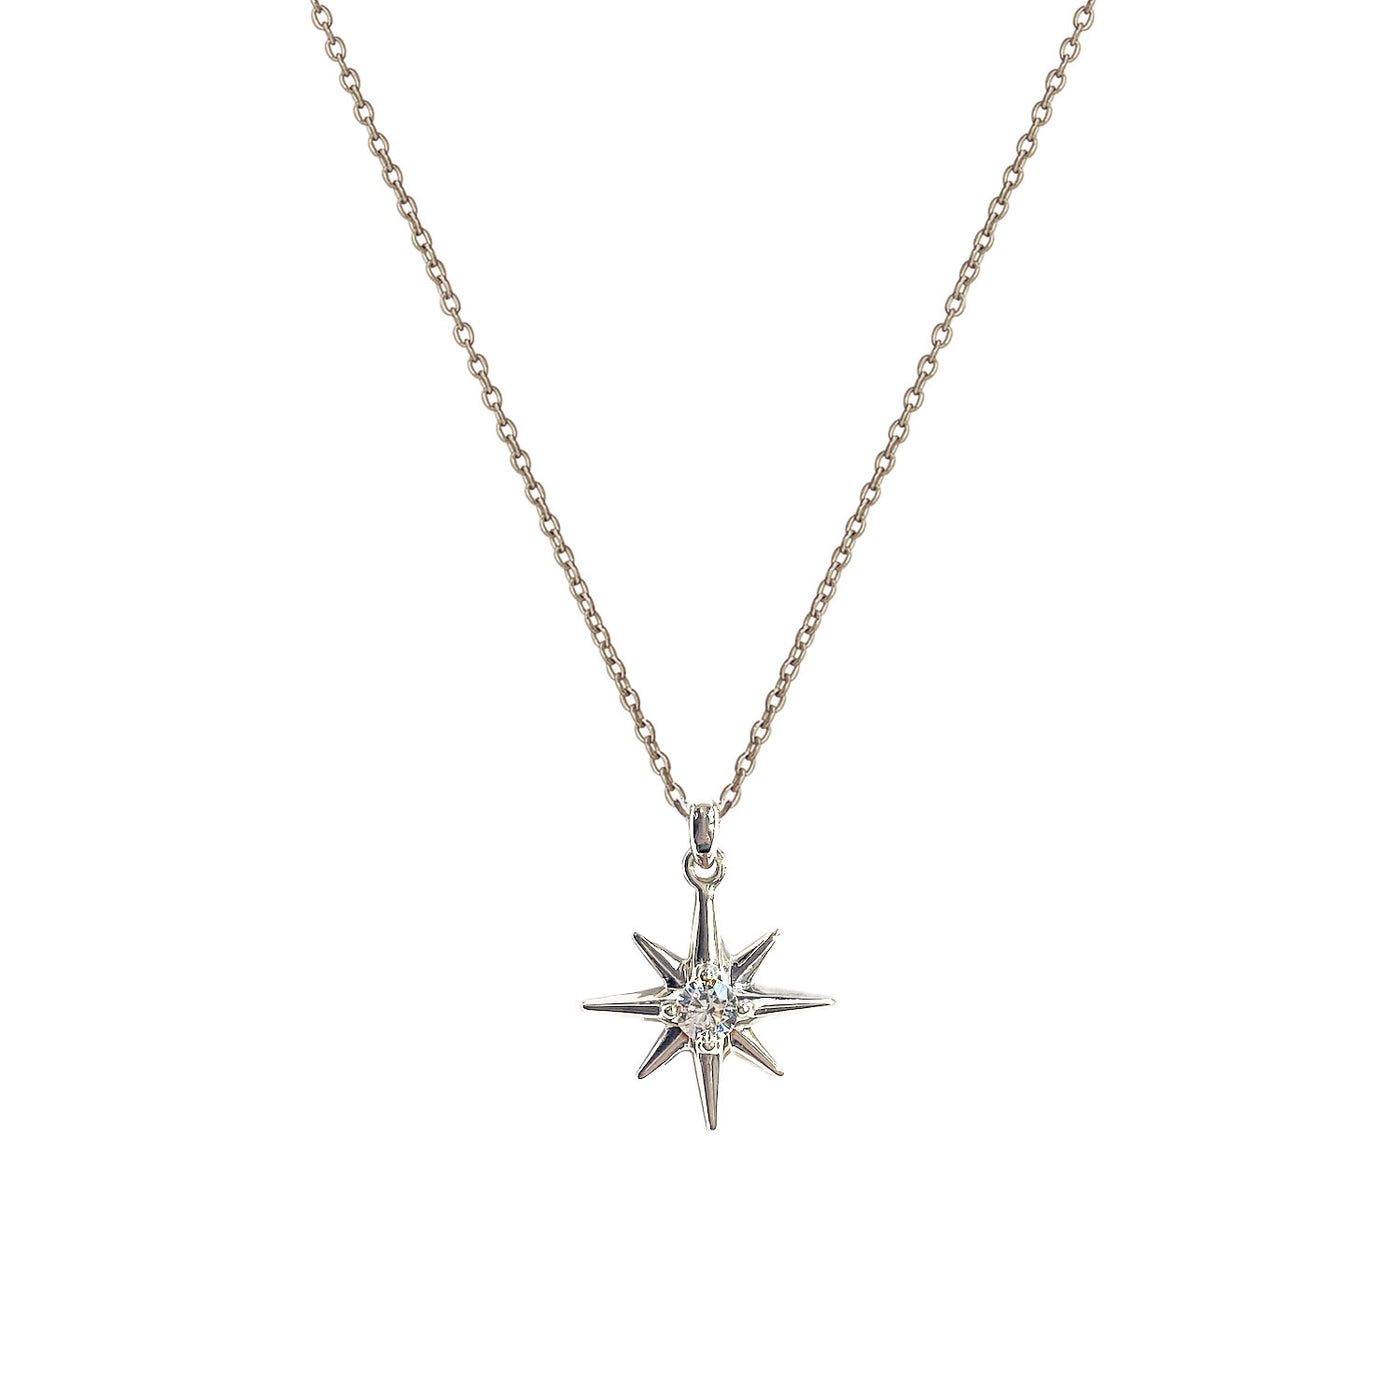 Sterling silver dainty star necklace with CZ crystal